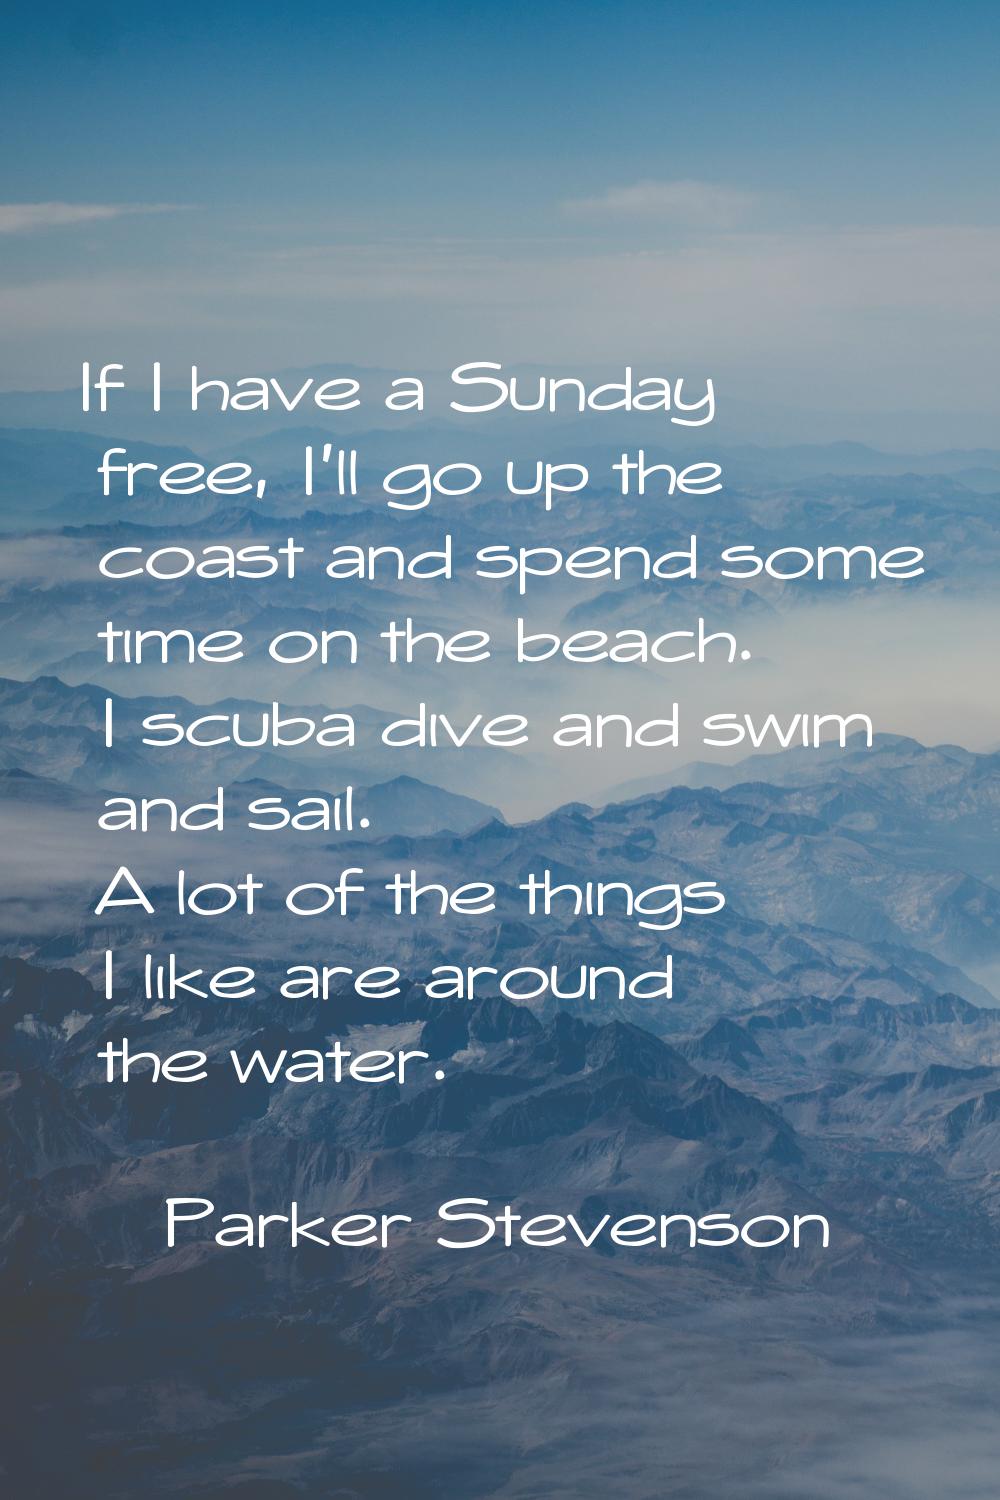 If I have a Sunday free, I'll go up the coast and spend some time on the beach. I scuba dive and sw